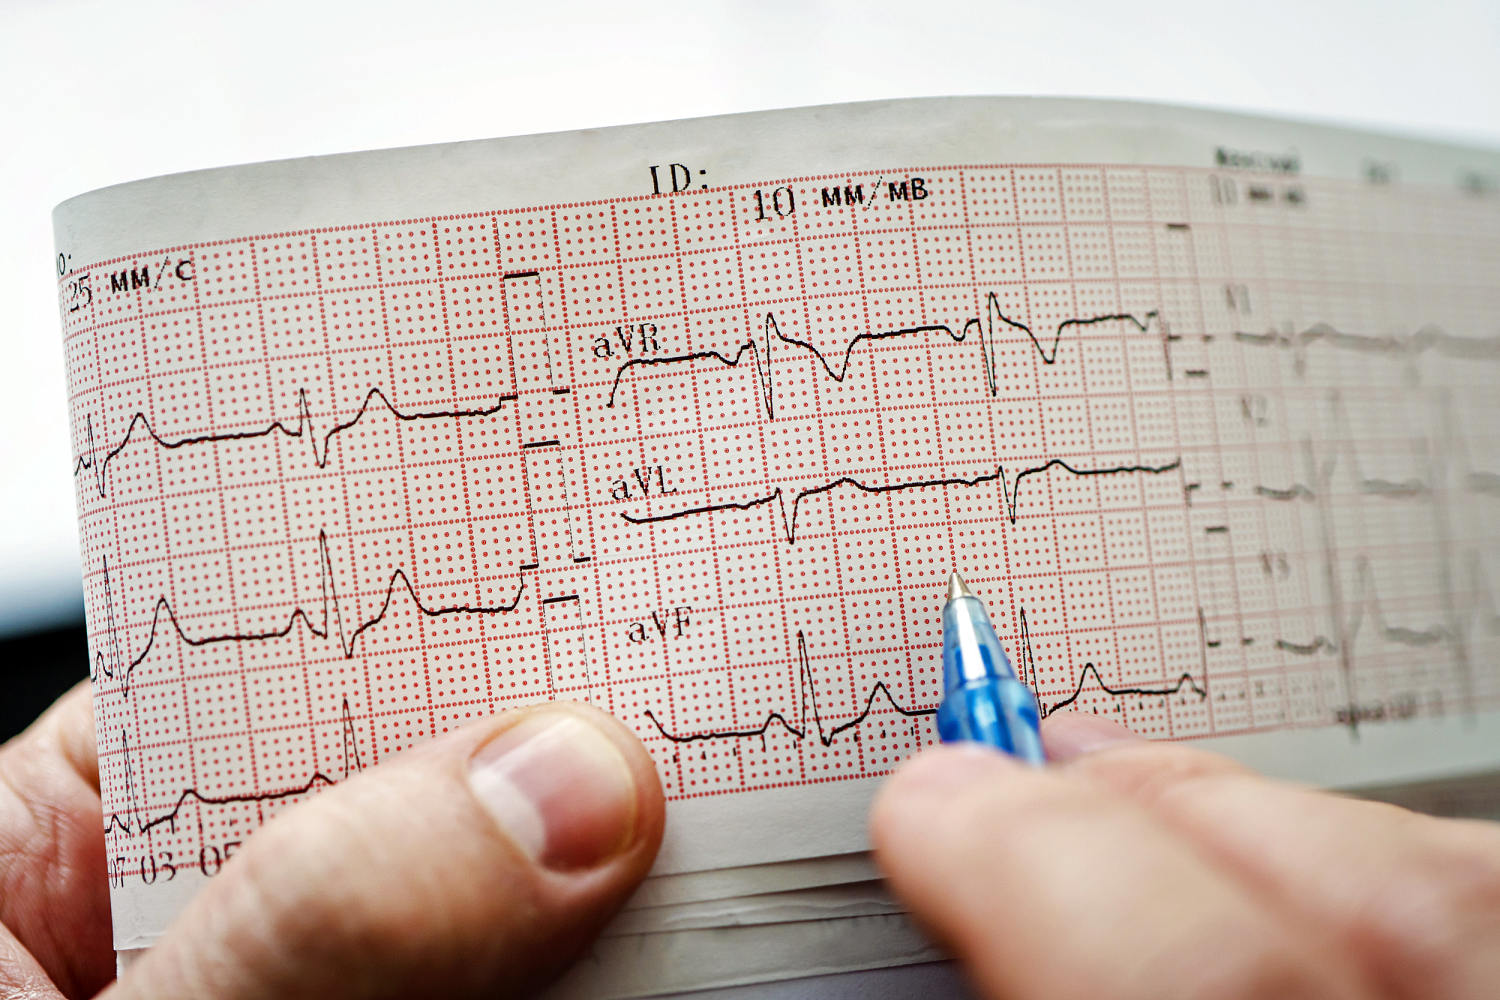 Sudden cardiac arrest deaths declining in college athletes, new research shows